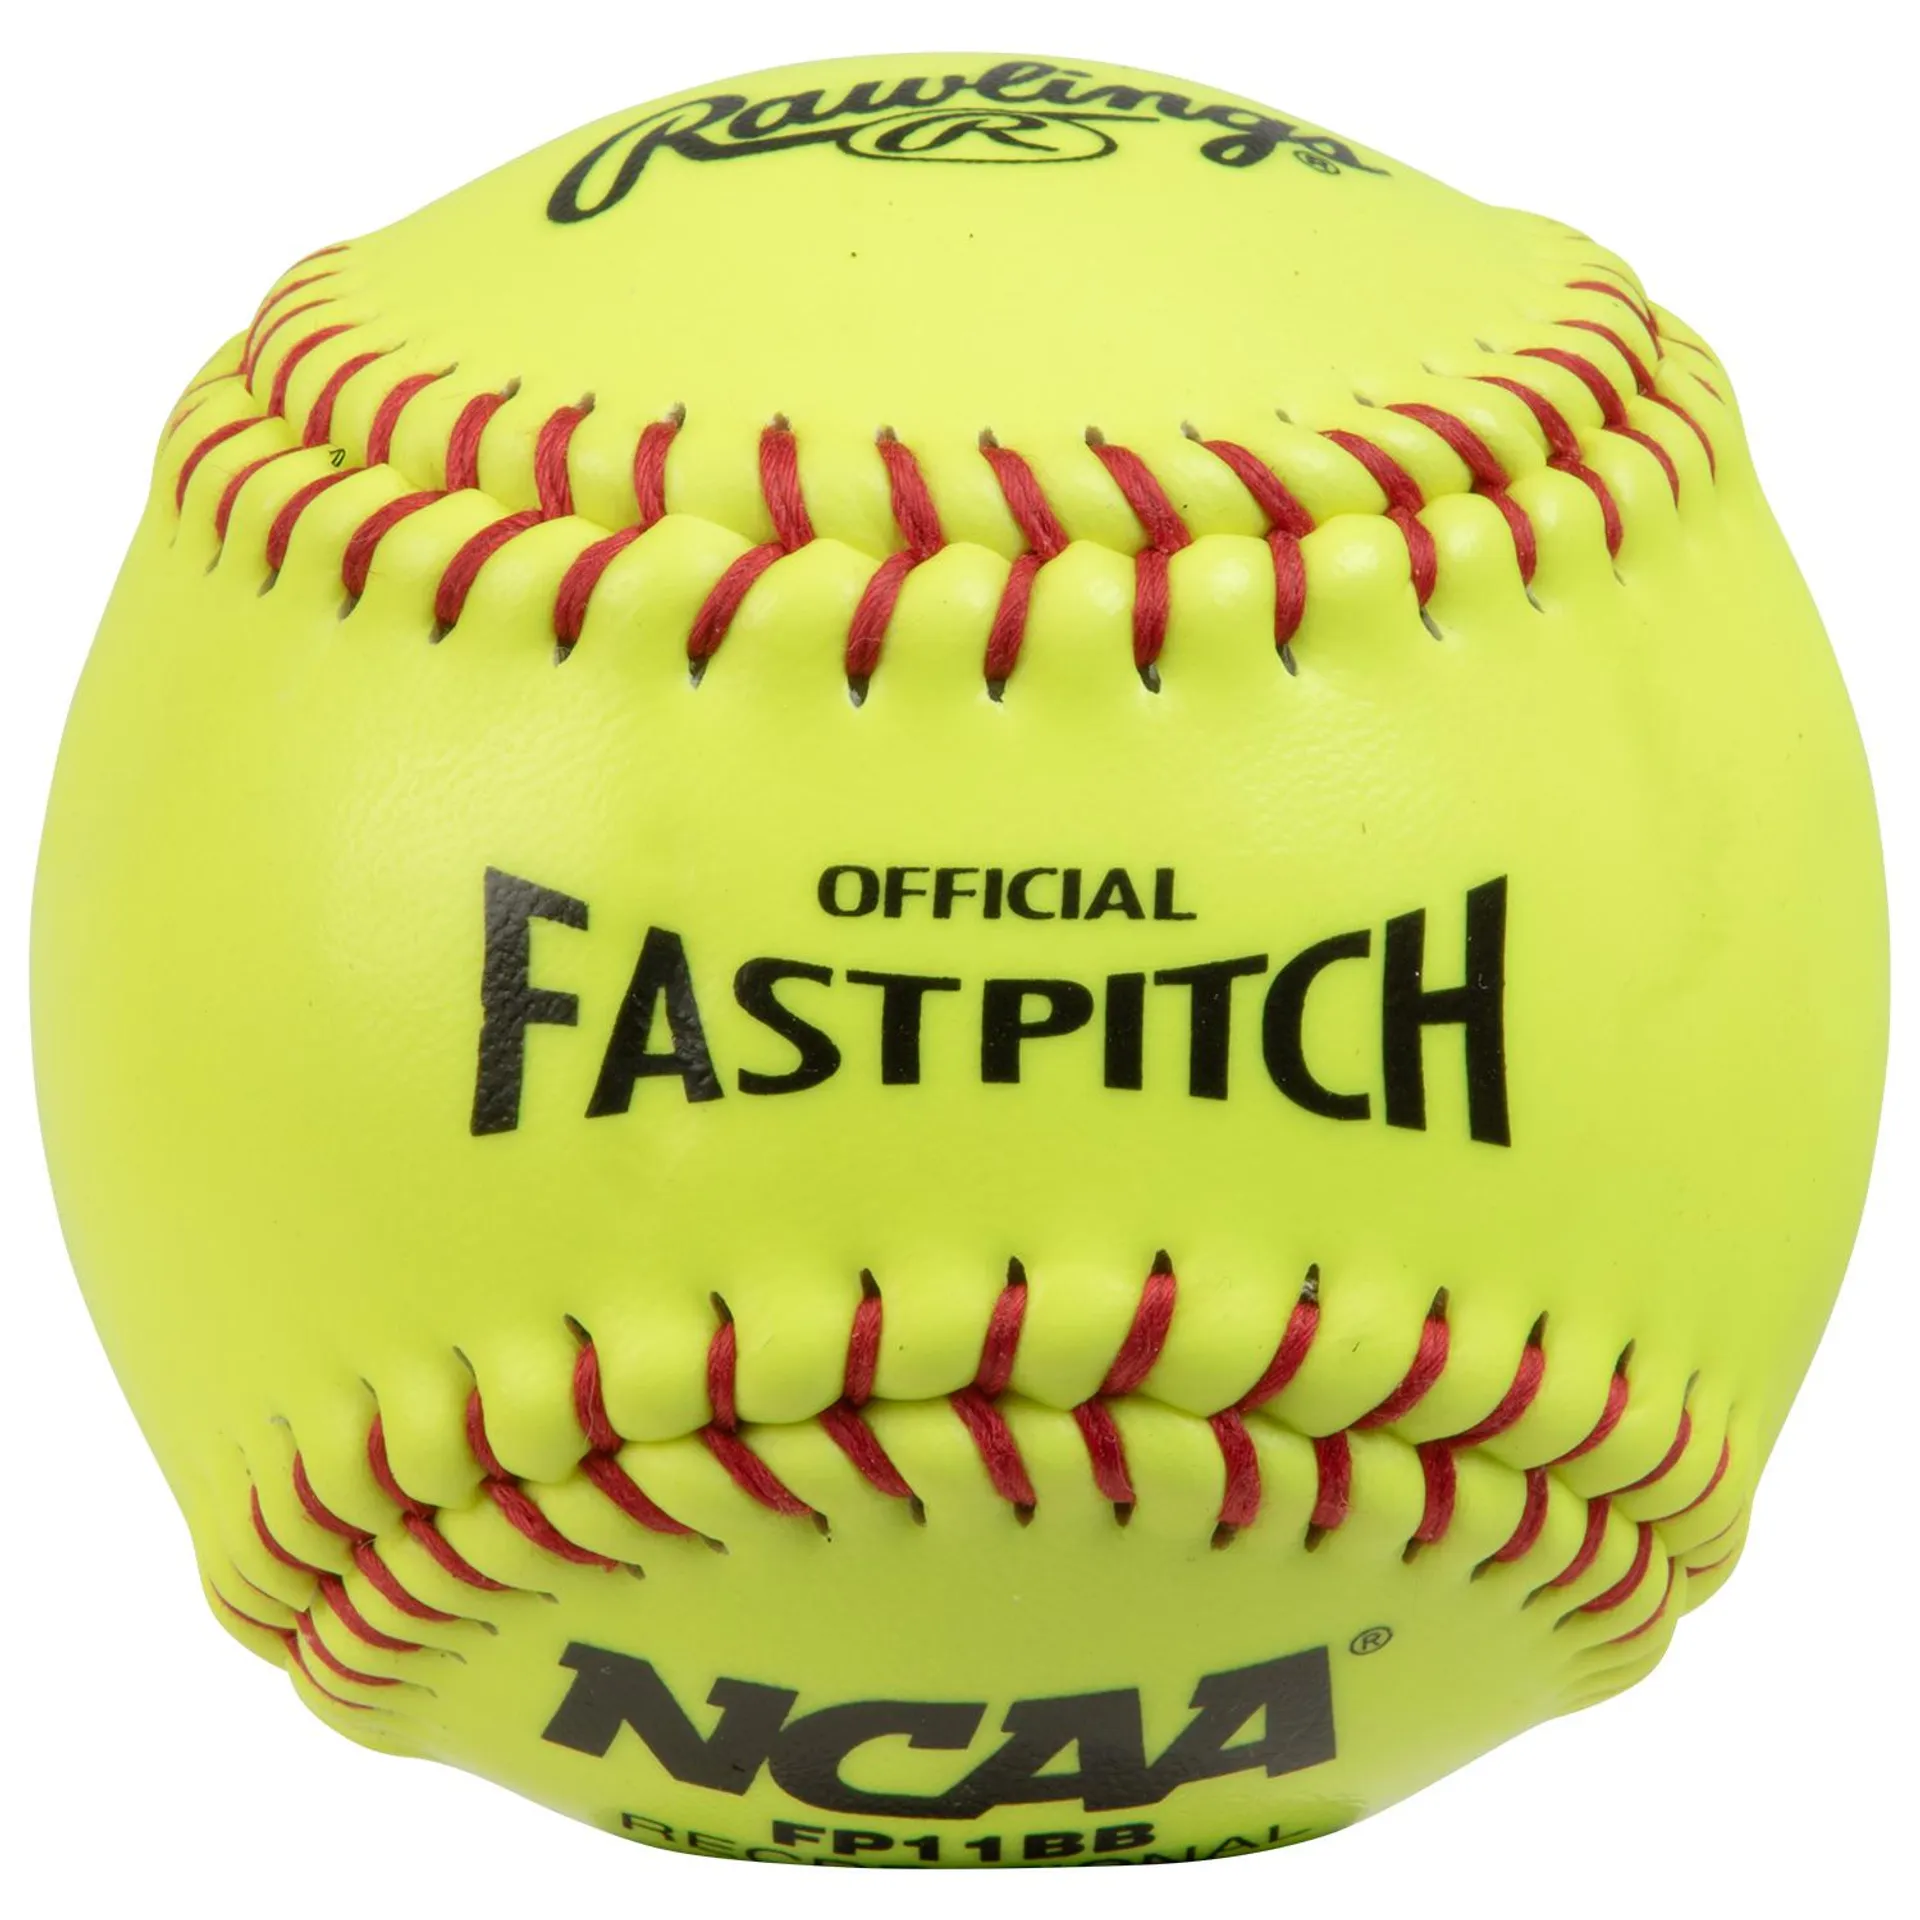 Rawlings 11" NCAA Practice Fastpitch Softballs - 4-Pack